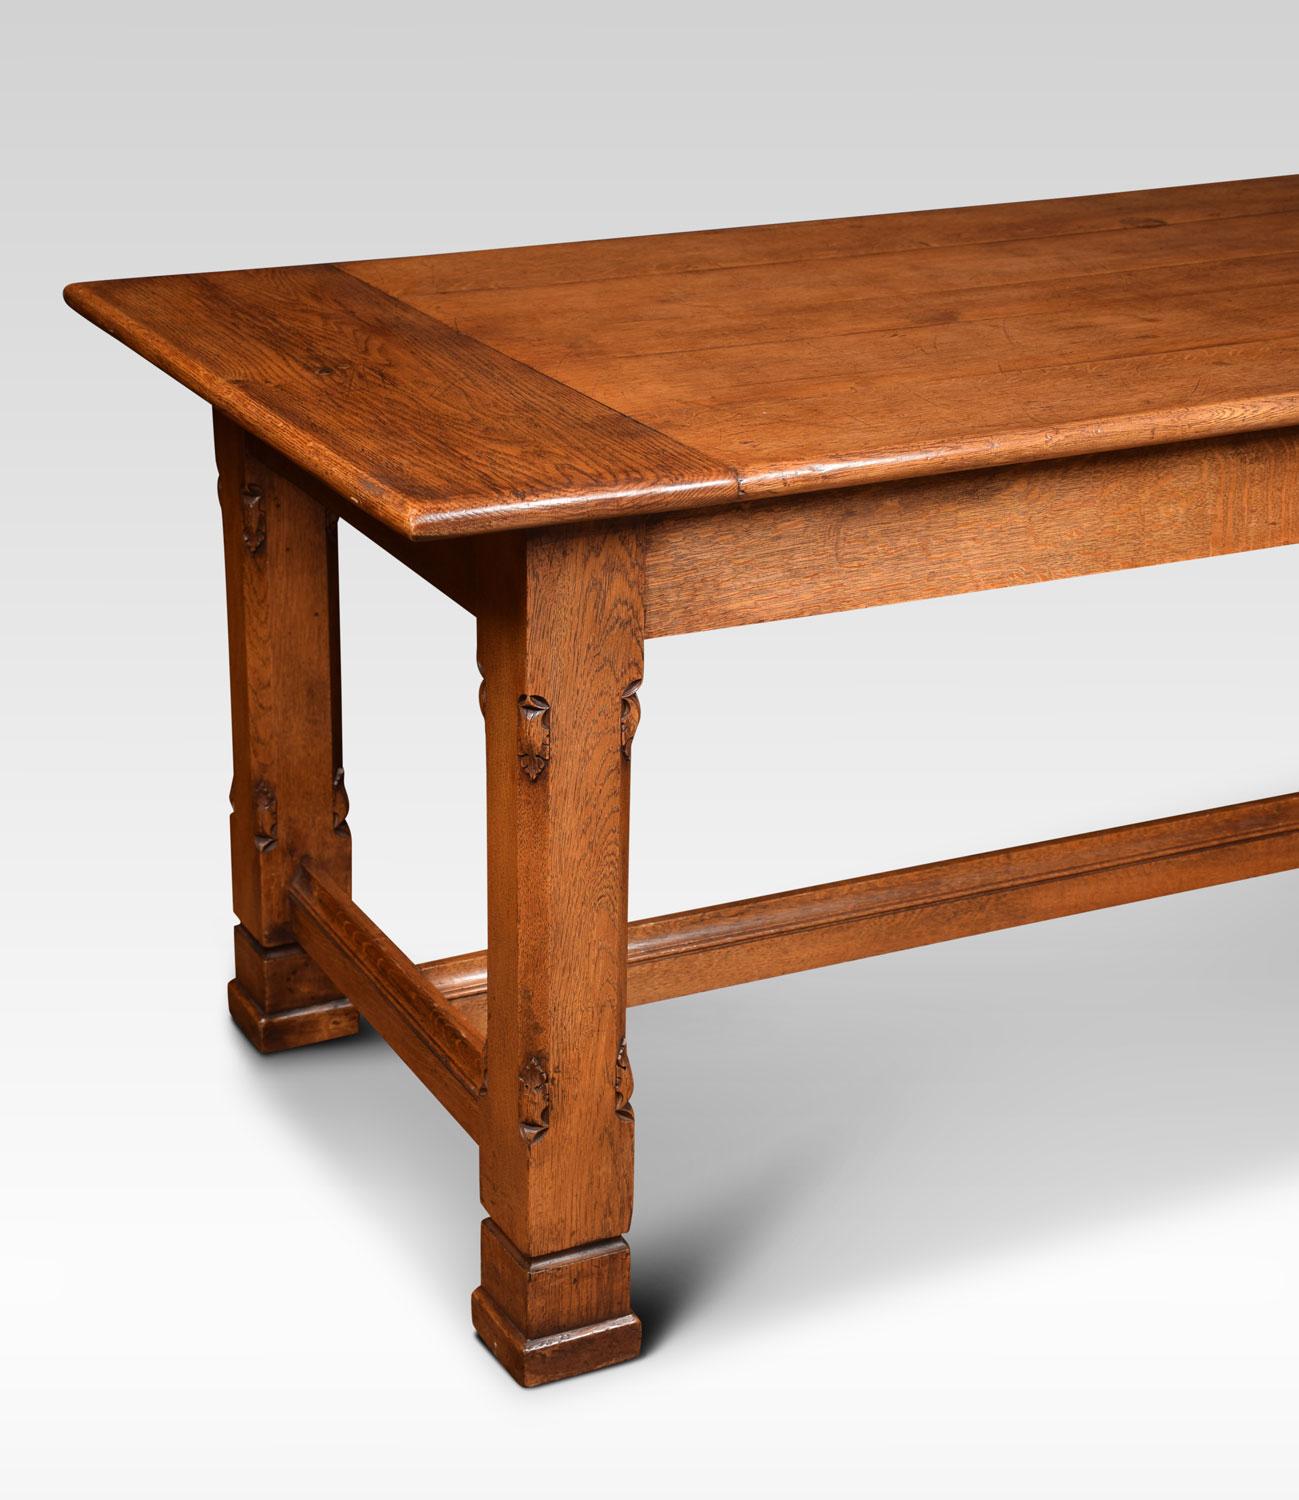 British Gothic Revival Oak Plank Top Refectory Table in the Manner of A. W. N. Pugin